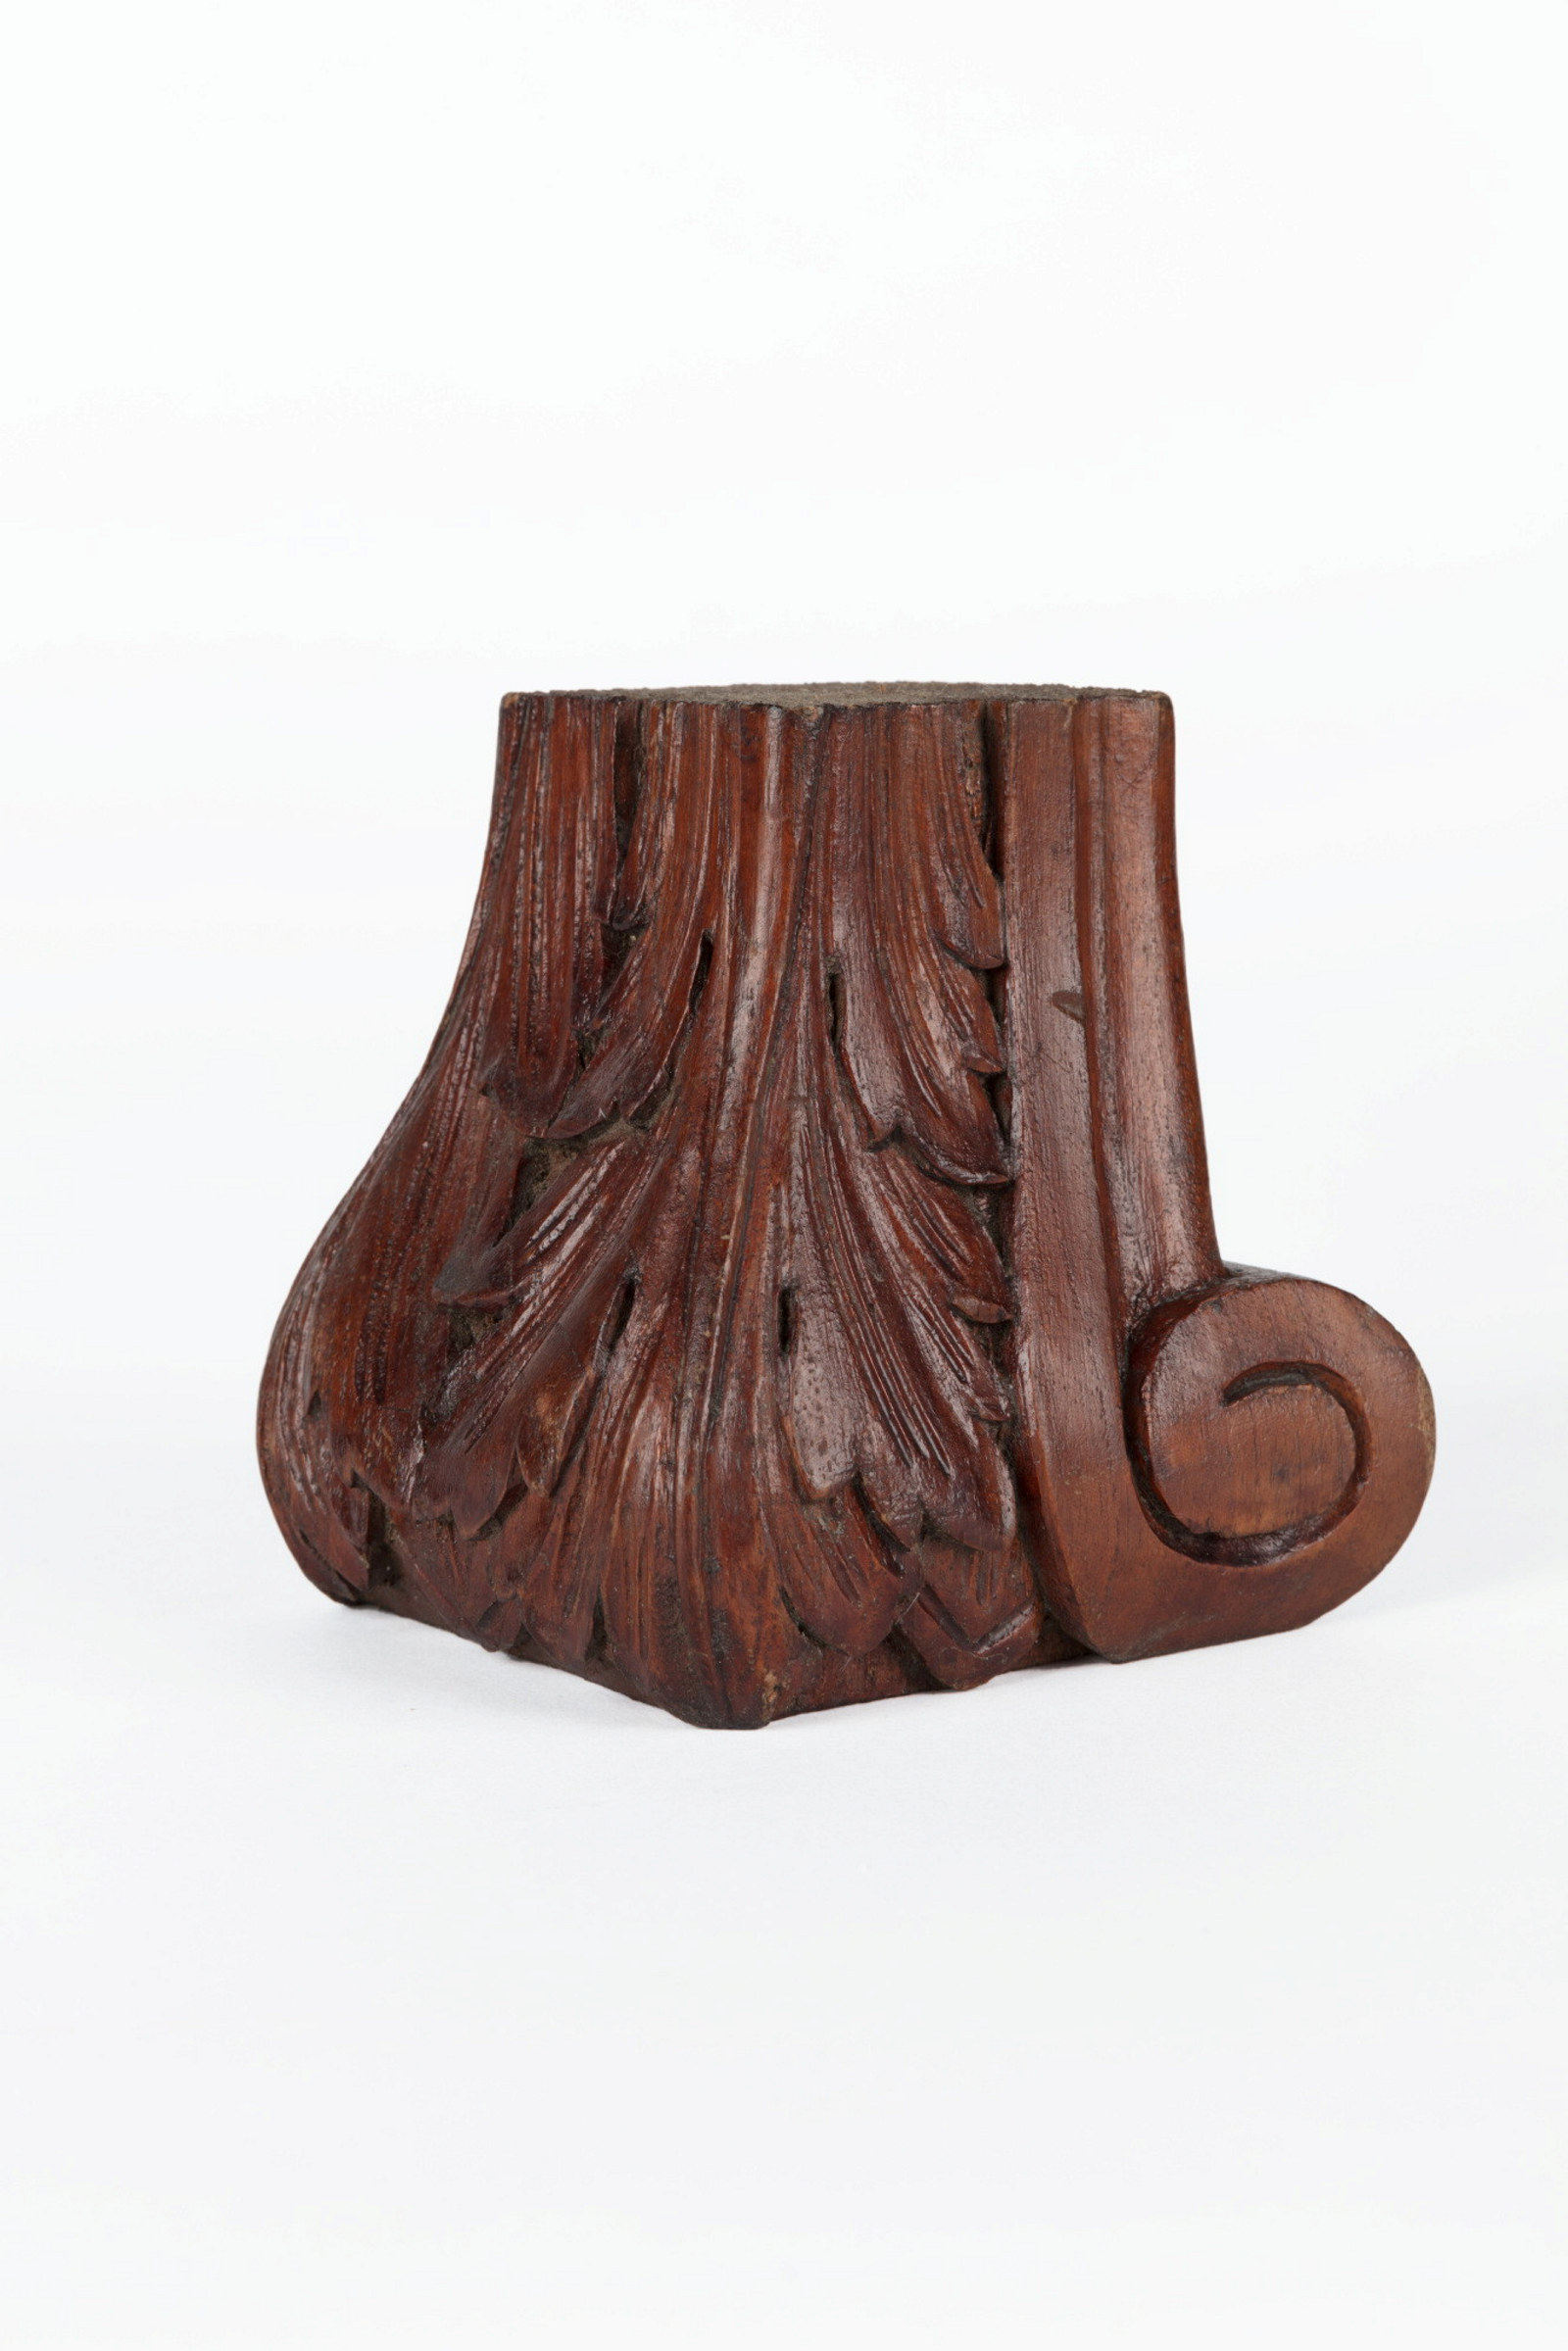 A carved timber furniture foot